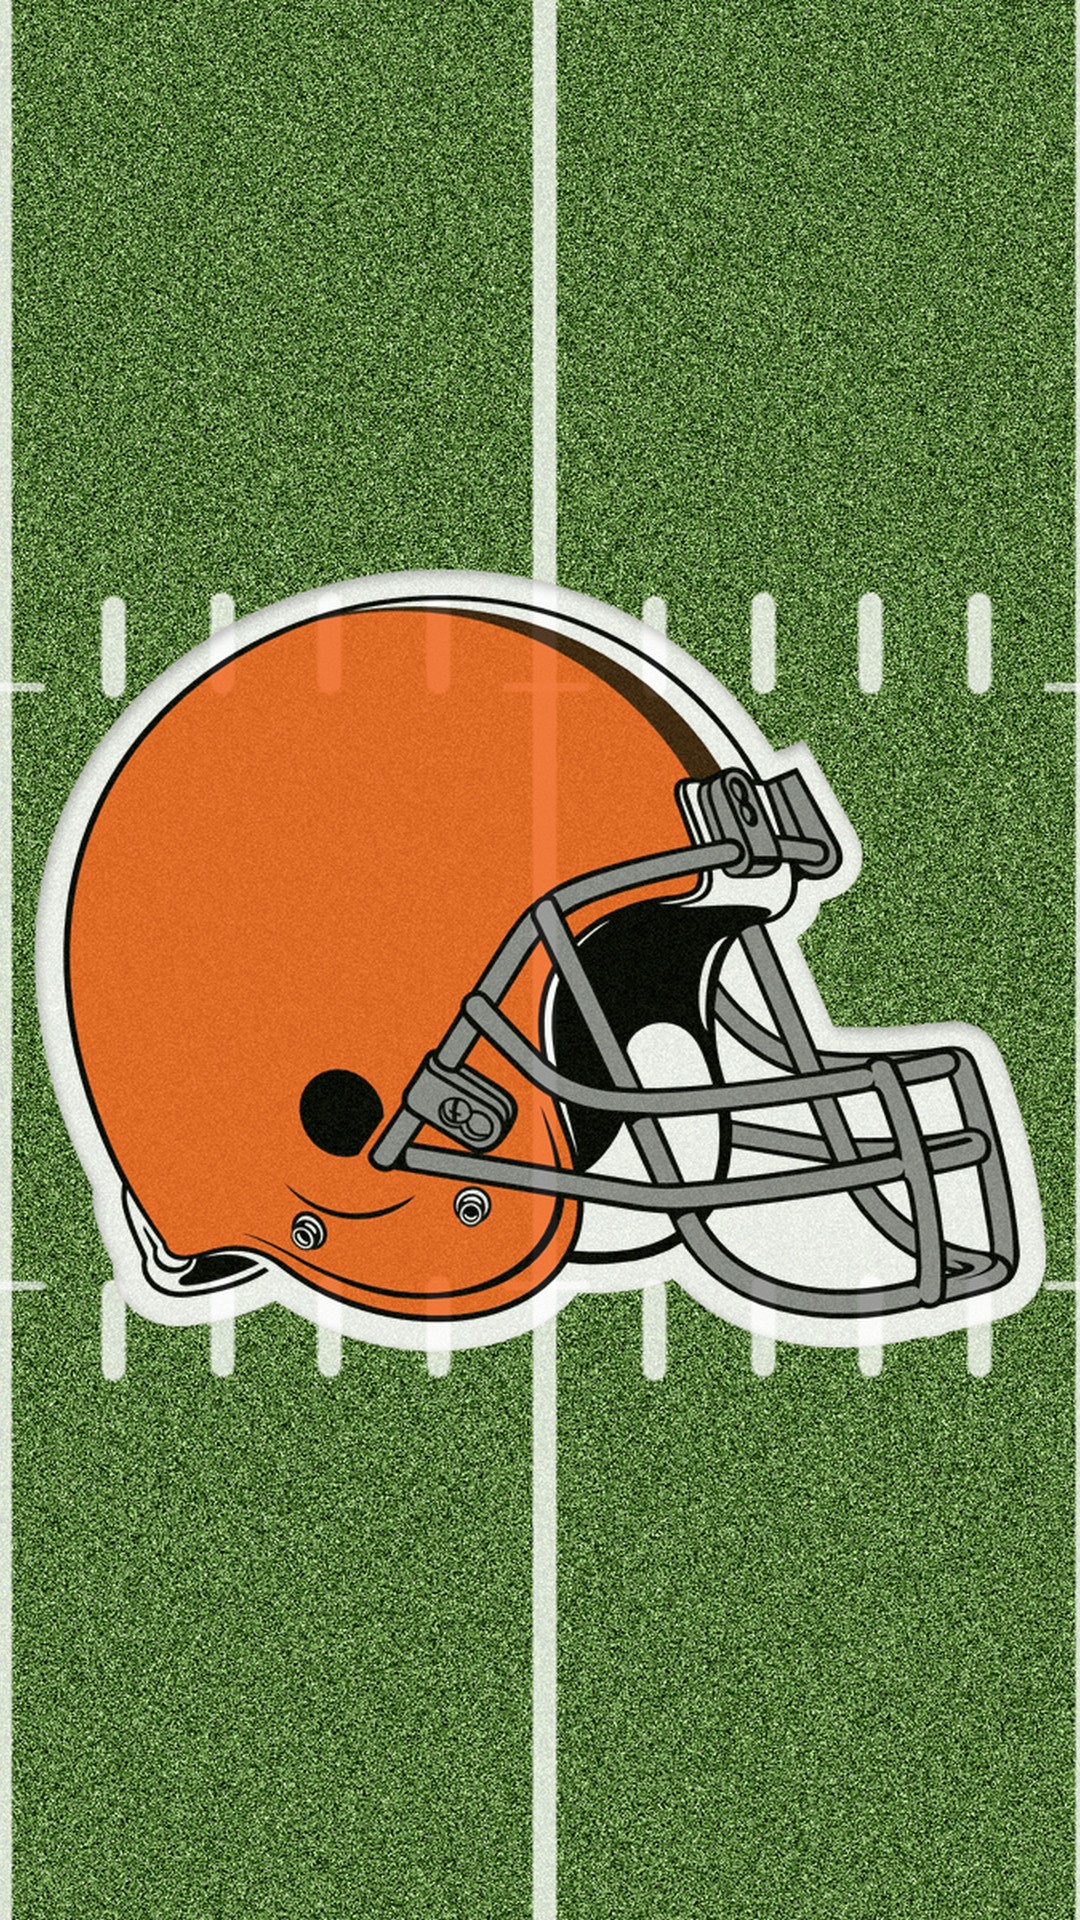 Cleveland Browns iPhone Wallpaper Tumblr With high-resolution 1080X1920 pixel. Download and set as wallpaper for Apple iPhone X, XS Max, XR, 8, 7, 6, SE, iPad, Android